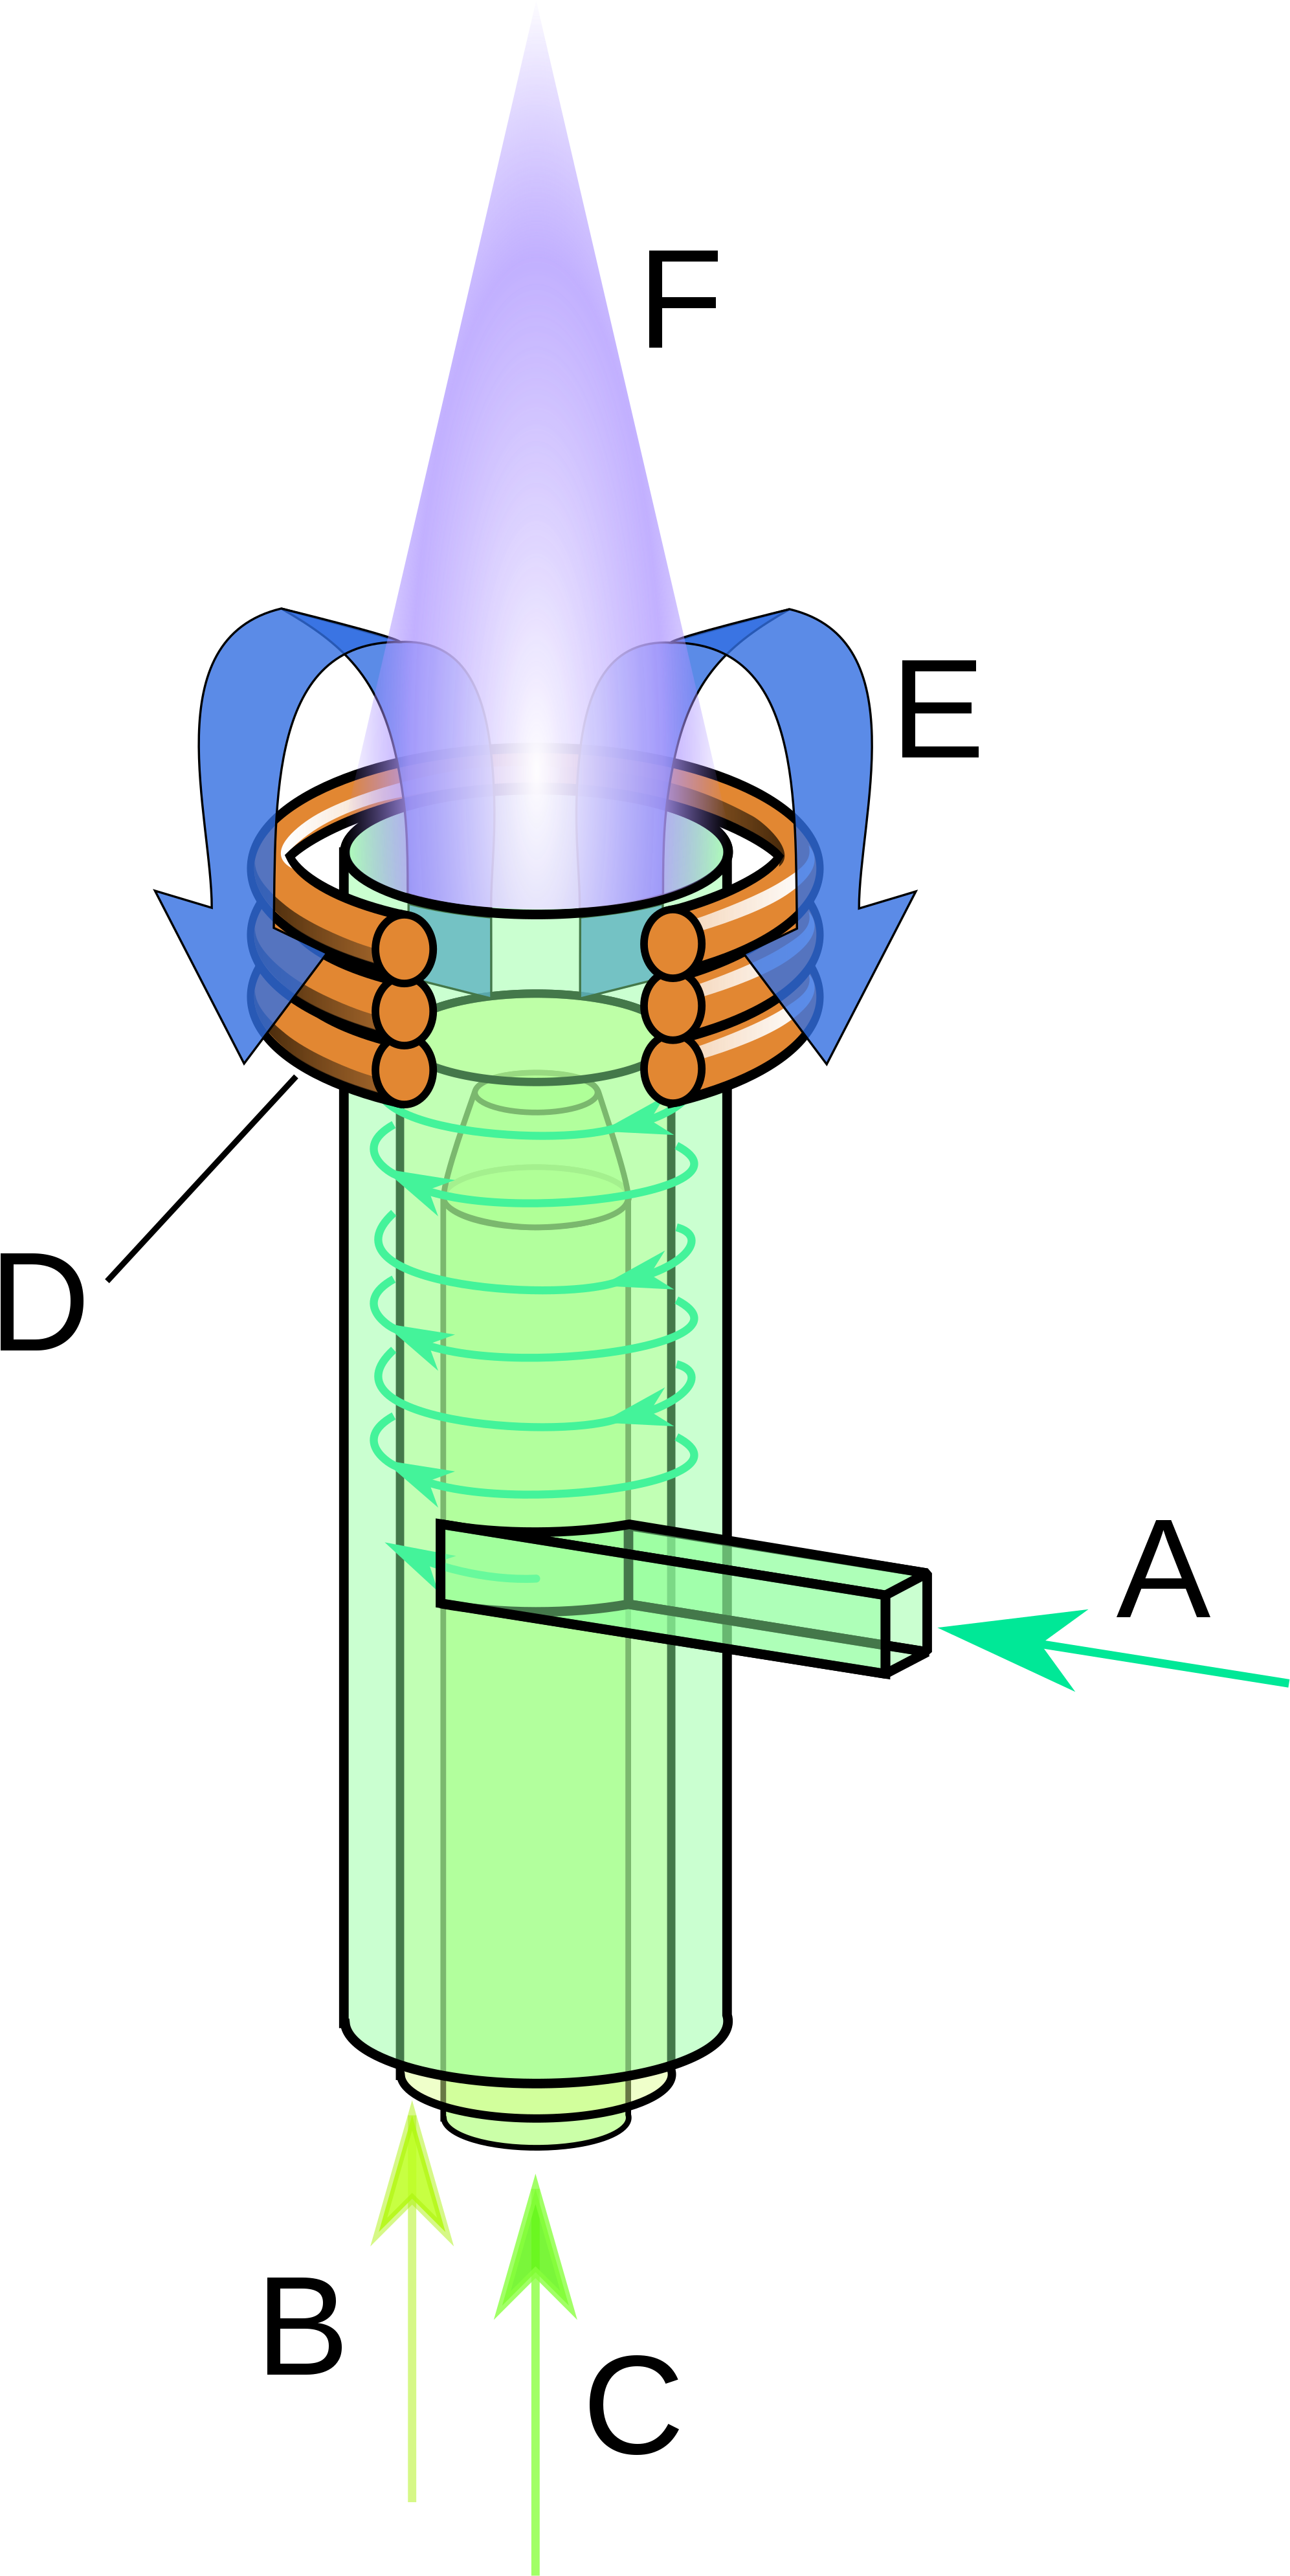 File - Icp Torch - Svg - Inductively Coupled Plasma Torch (2000x3978)